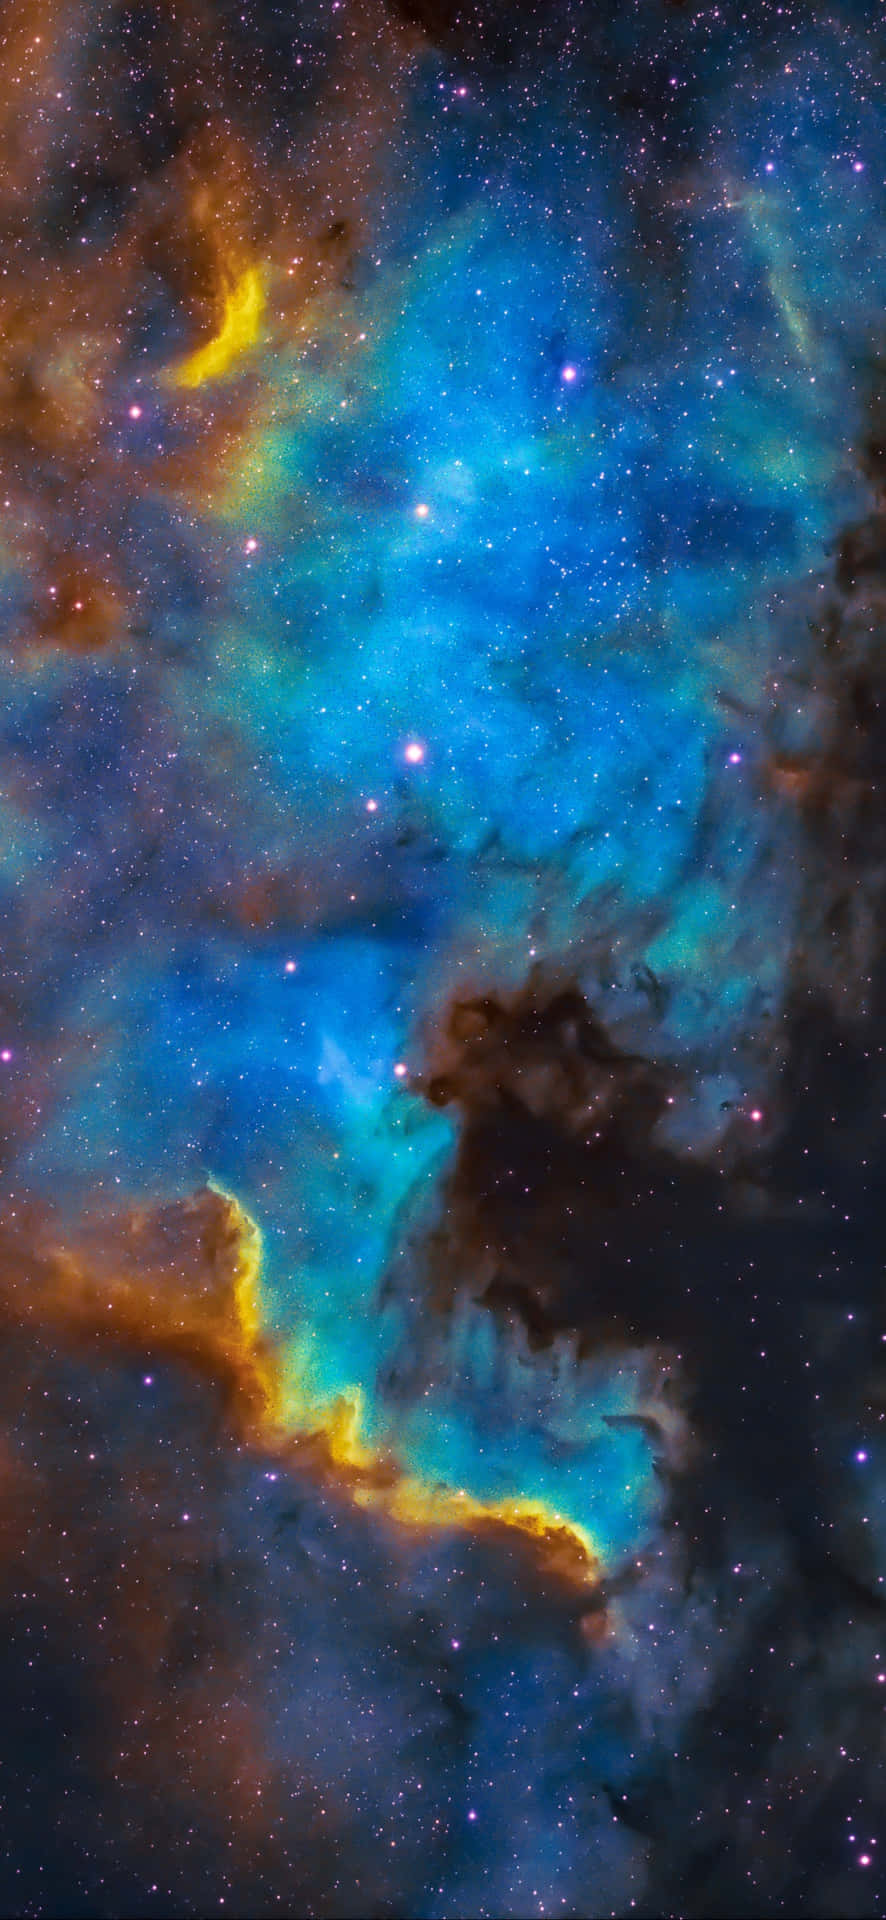 A Blue And Orange Nebula With Stars In The Background Wallpaper